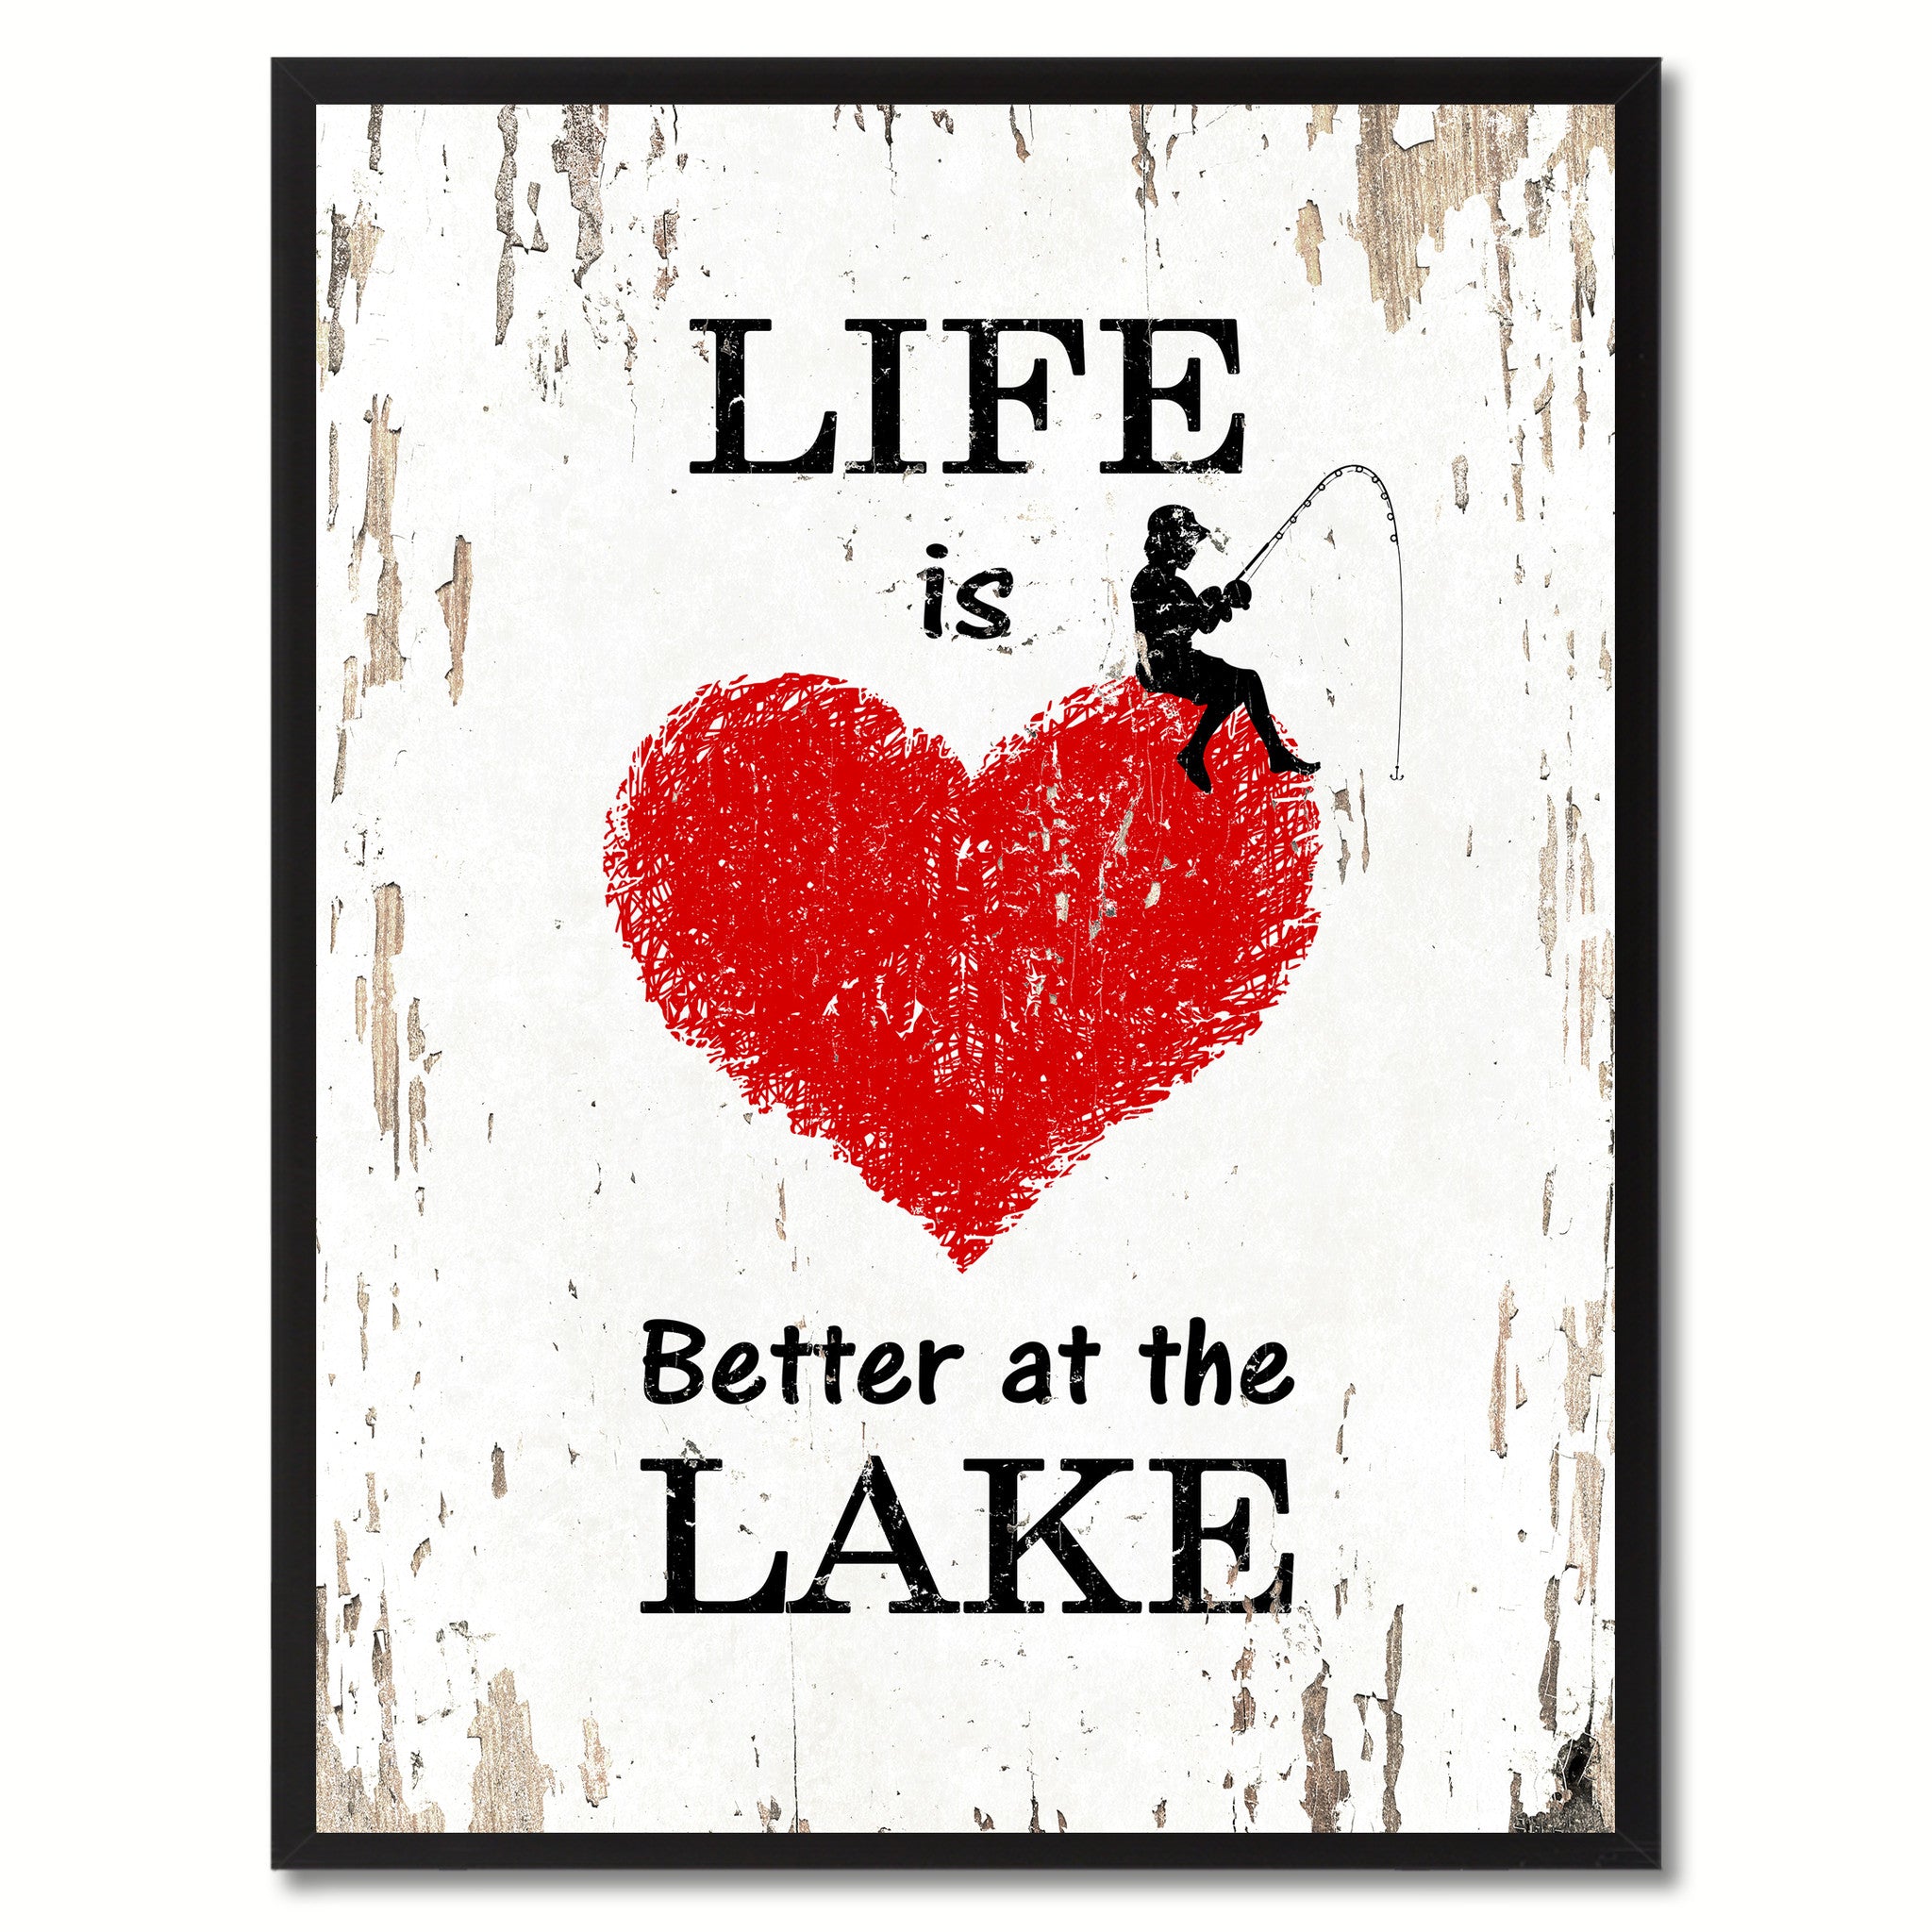 Life Is Better At The Lake Saying Canvas Print, Black Picture Frame Home Decor Wall Art Gifts